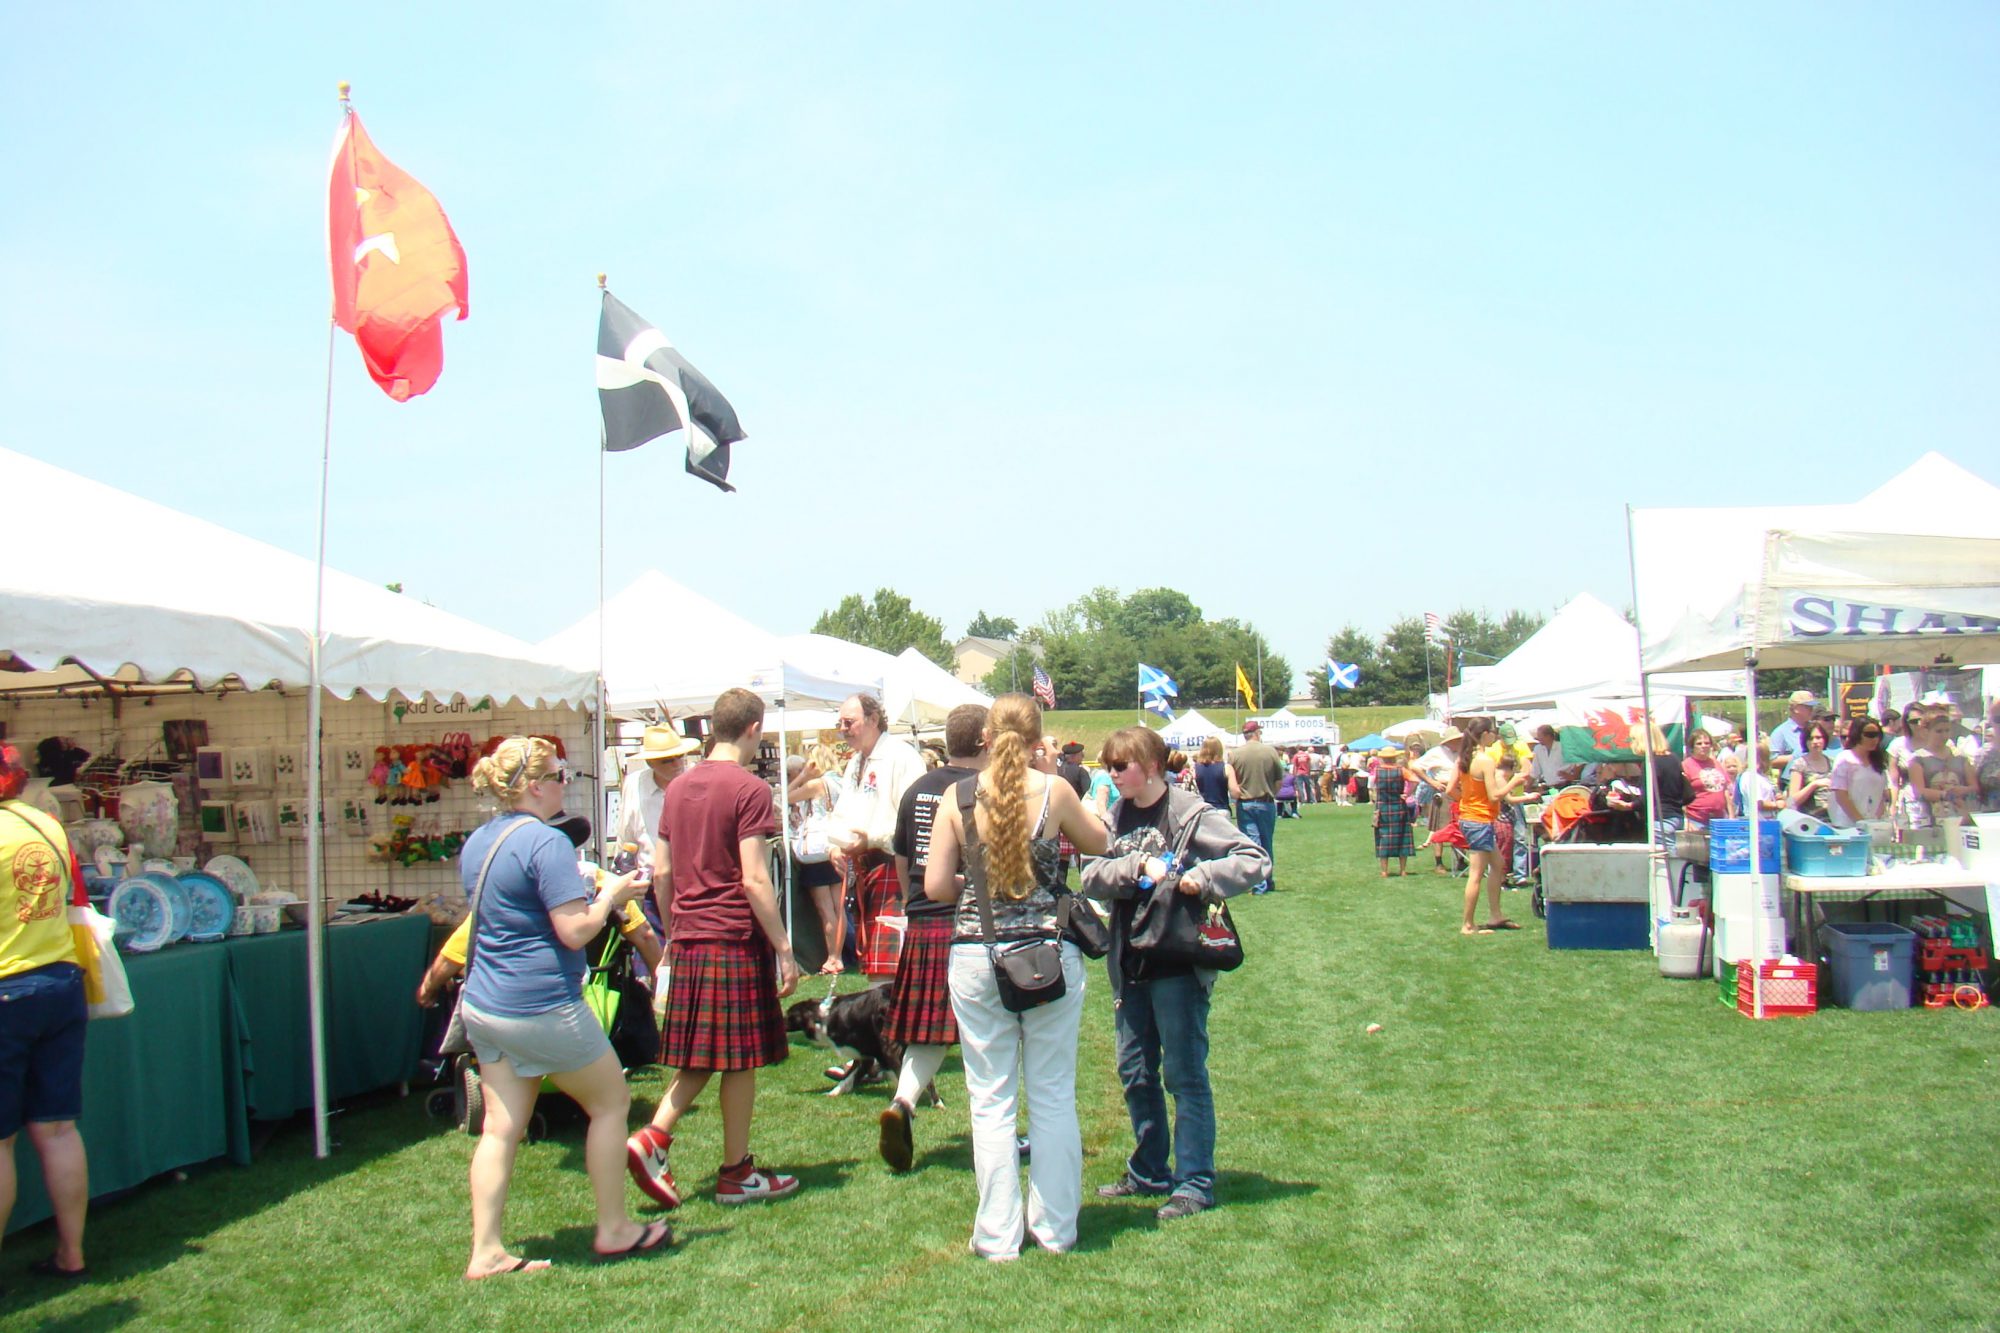 Scottish festival crowd and tents